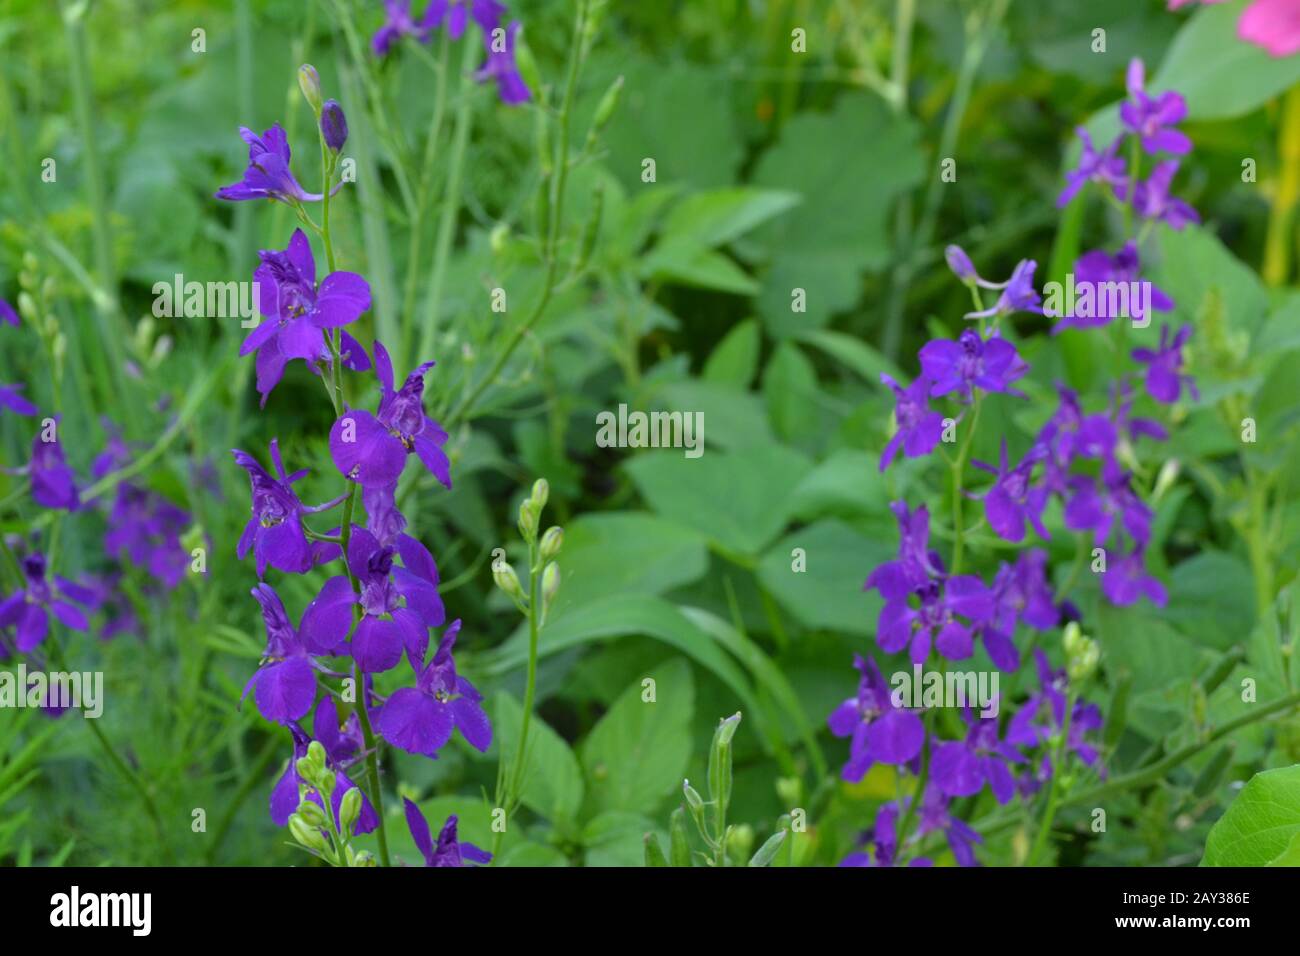 Consolida. Delicate flower. Flower purple. Small flowers on the stem. Among the green leaves. Garden. Field. Growing flowers. On blurred background. H Stock Photo